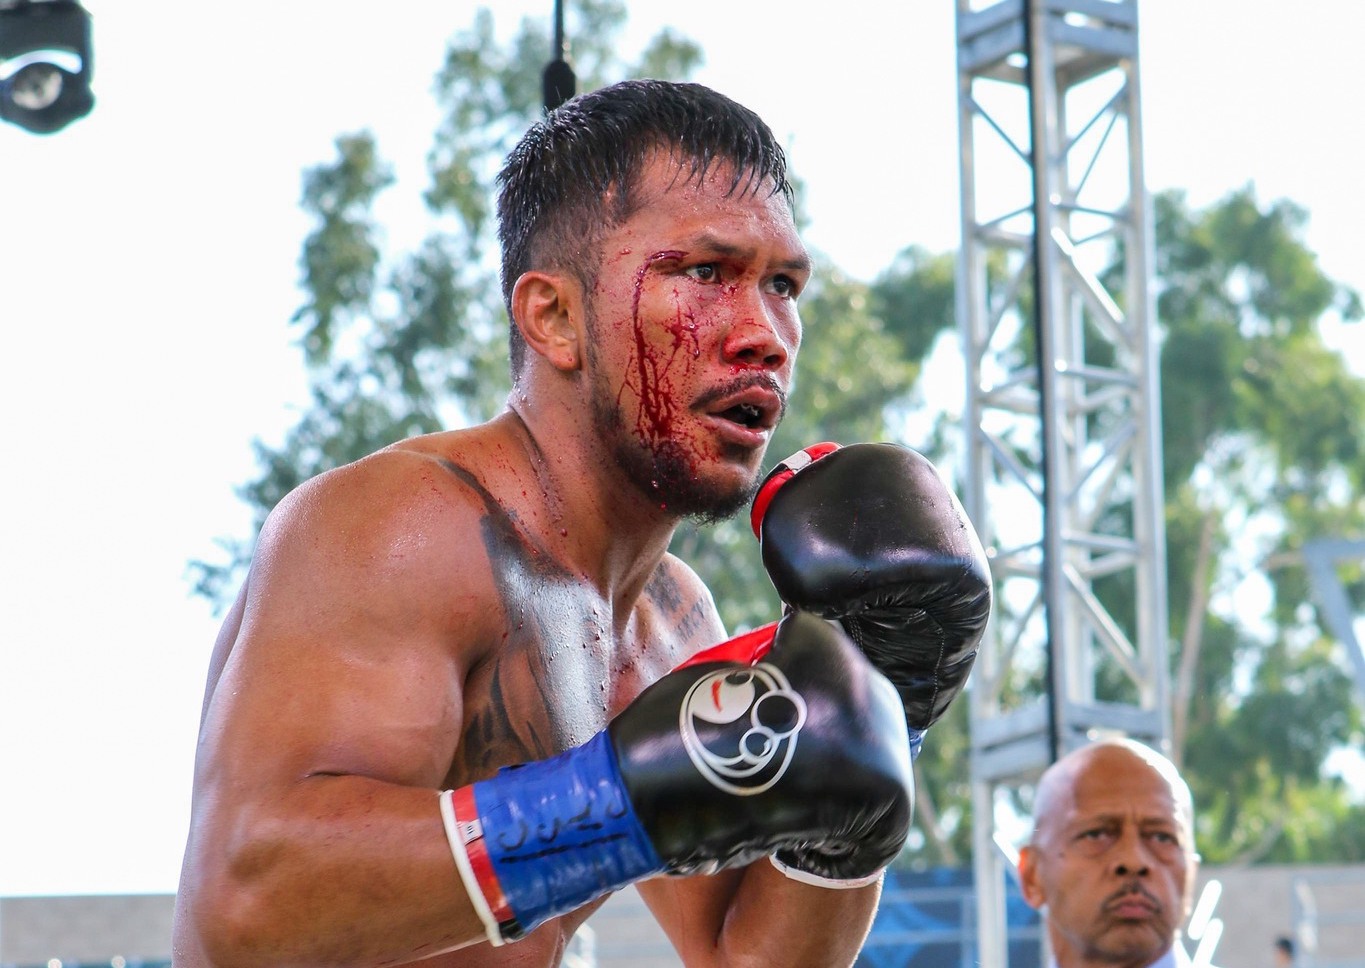 Eumir Marcial in his third professional bout in California on Sunday (Manila time).